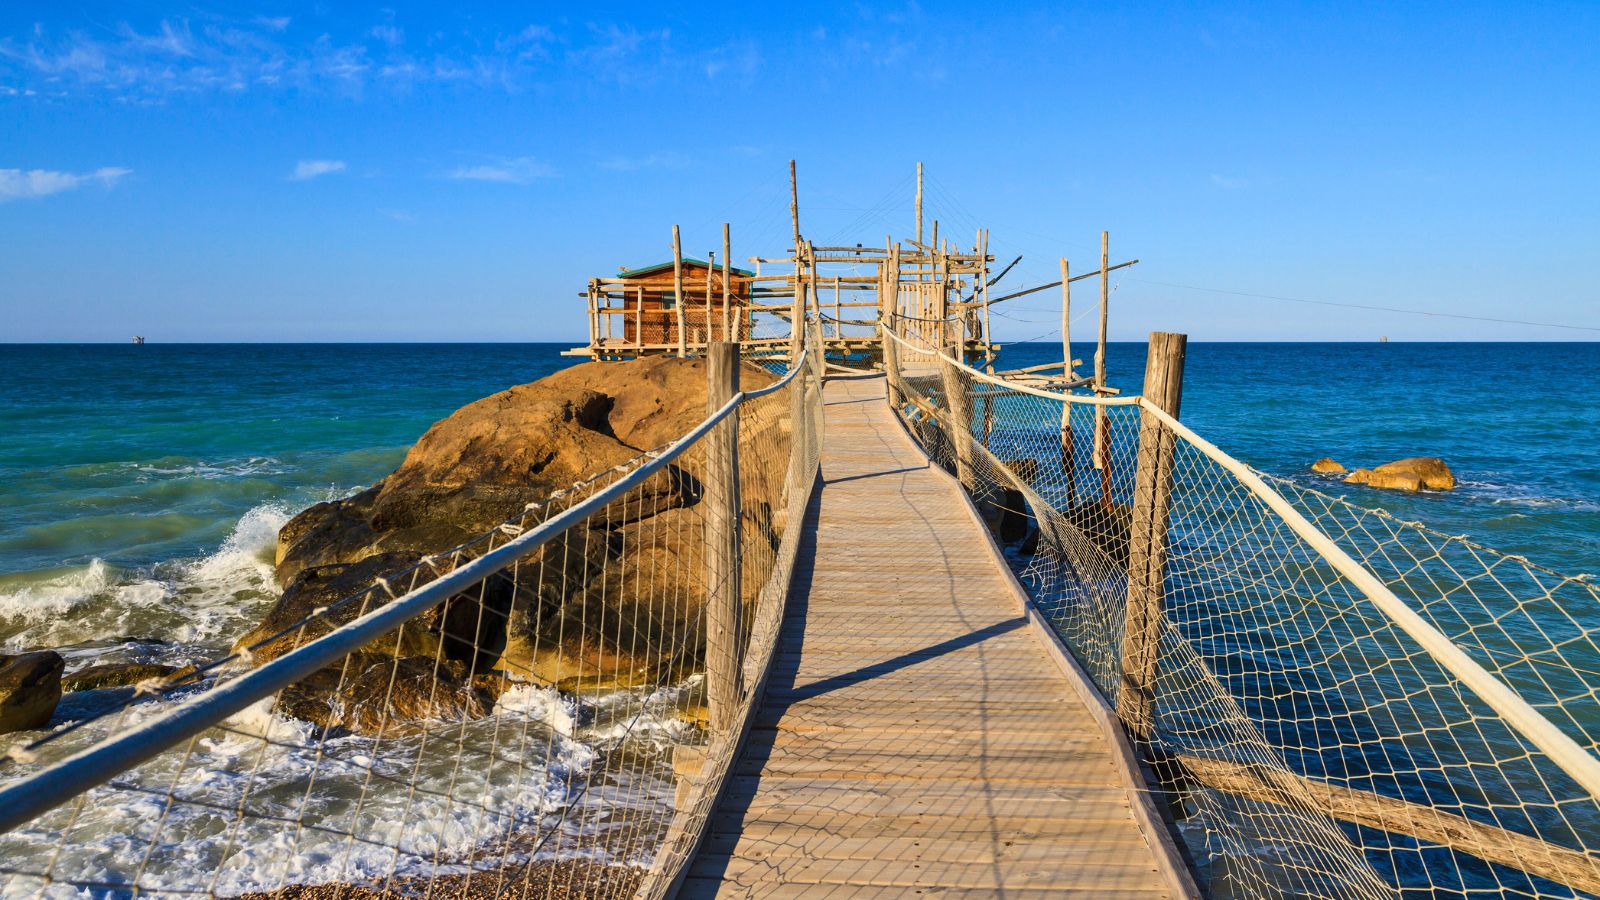 <p><span>Abruzzo, southern Italy, is home to a 70km stretch of Adriatic coast named after the old fishing structures, called </span><i><span>trabocchi</span></i><span>, dotted along it.</span></p><p><span>Built on stilts that rise up from the water, these unique wooden platforms date back hundreds of years. Their original purpose? To enable locals to fish in waters too treacherous for boats. Wooden arms extend outward, dropping fishing nets into the deep waters below.</span></p><p><span>Nowadays, many of these trabocchi have been converted into restaurants. Visit for a unique slice of coastal Italian history and dinner with a view!</span></p>